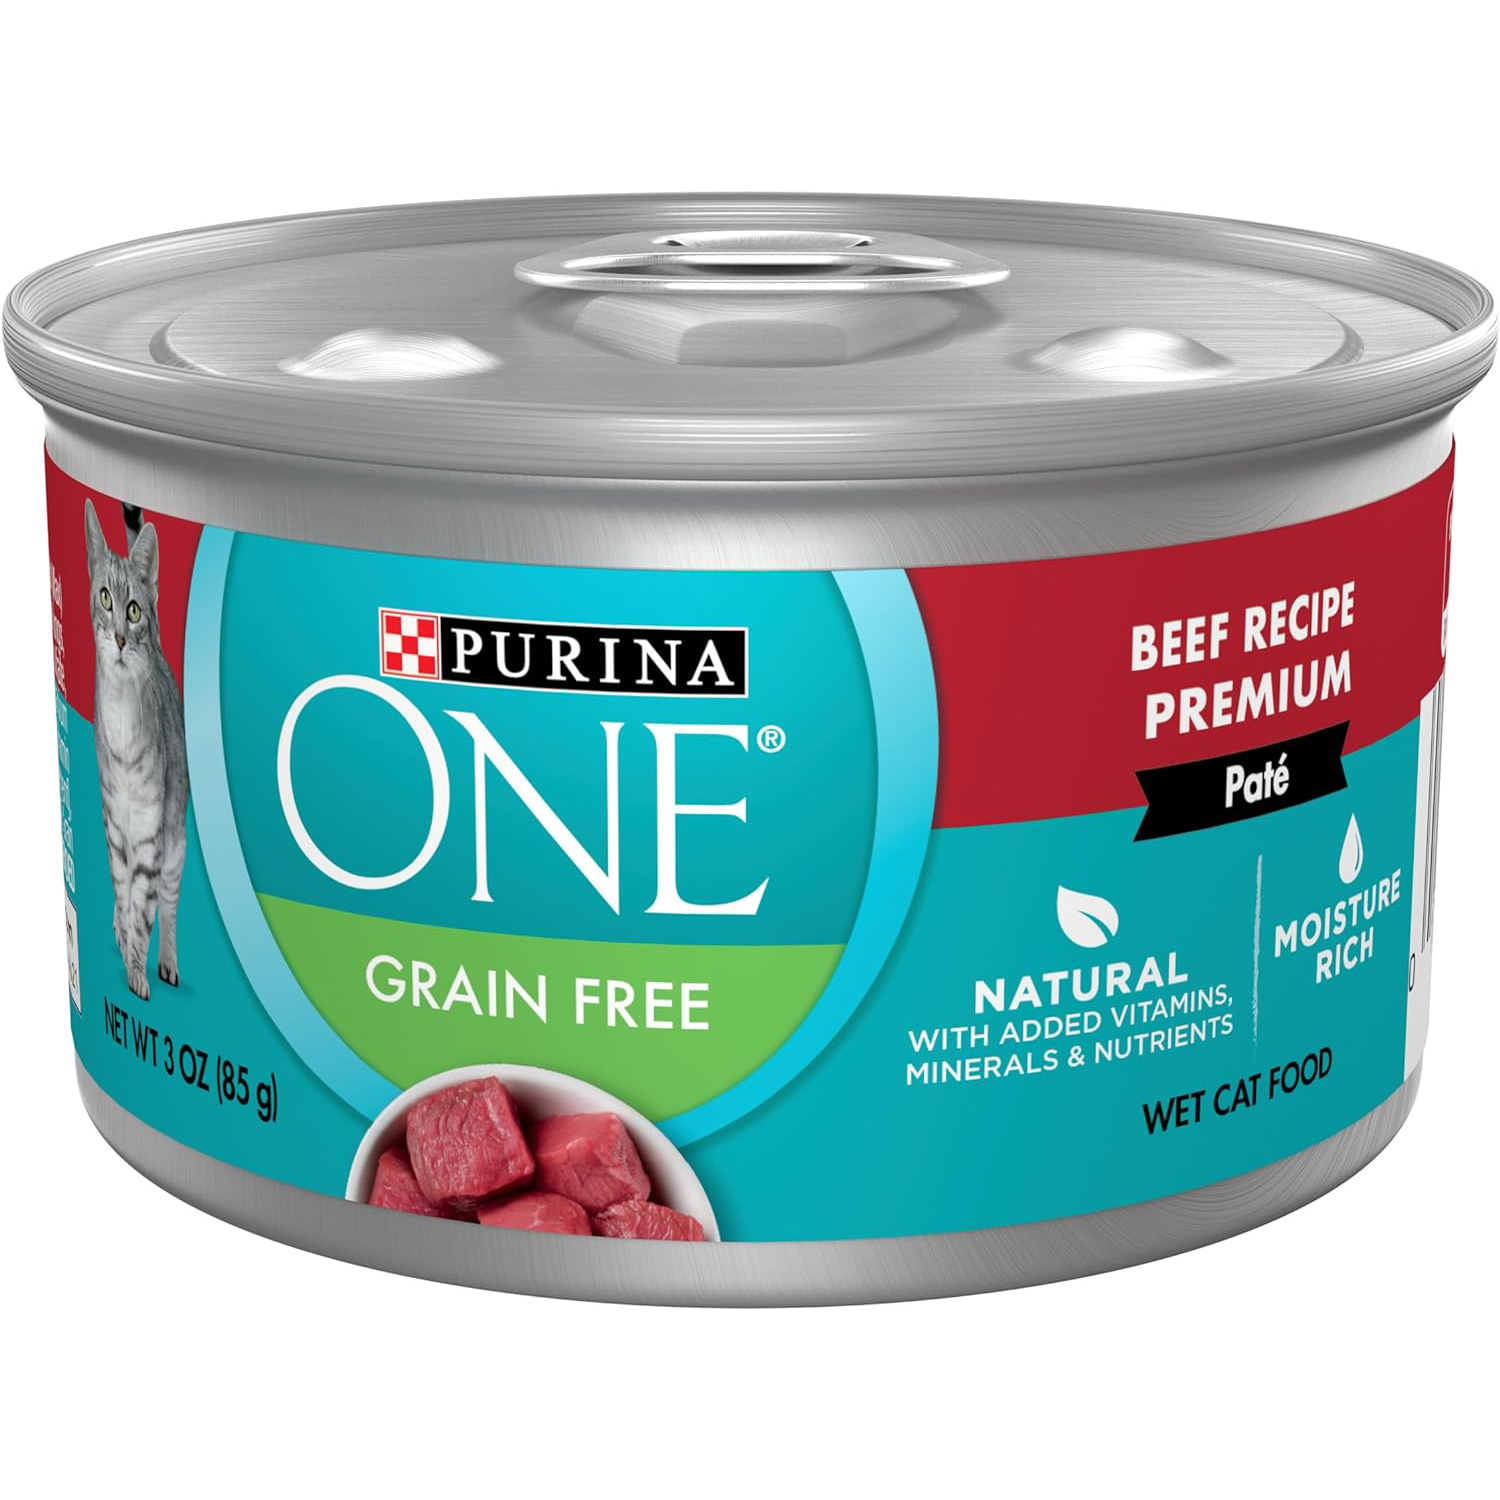 Purina ONE Natural, High Protein, Grain Free Wet Cat Food Pate, Beef Recipe